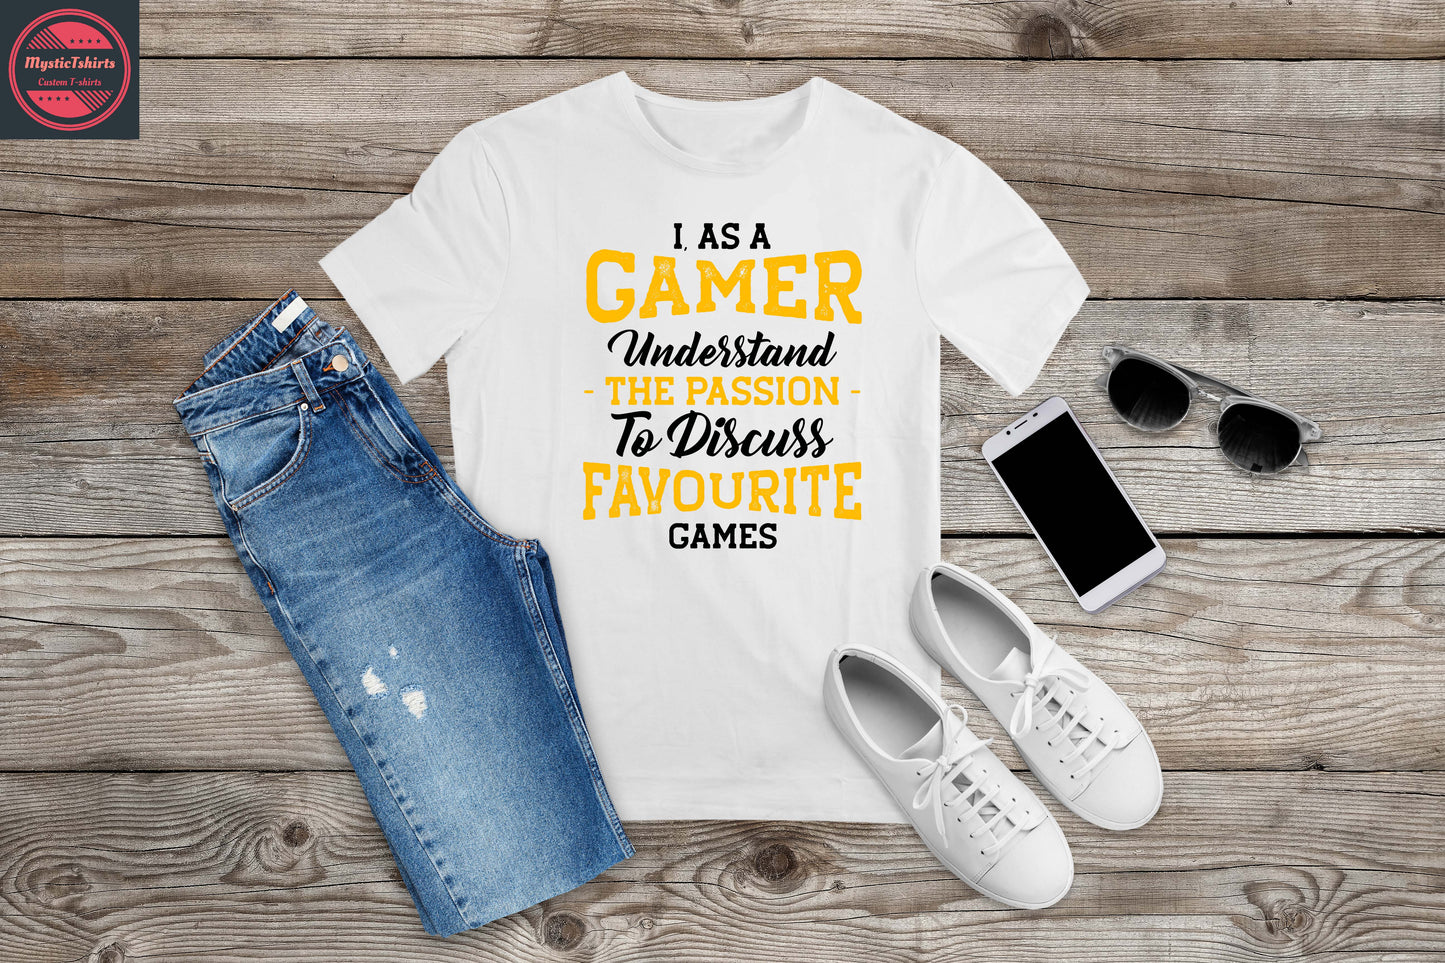 236. I, AS A GAMER UNDERSTAND THE PASSION TO DISCUSS FAVOURITE GAMES, Custom Made Shirt, Personalized T-Shirt, Custom Text, Make Your Own Shirt, Custom Tee